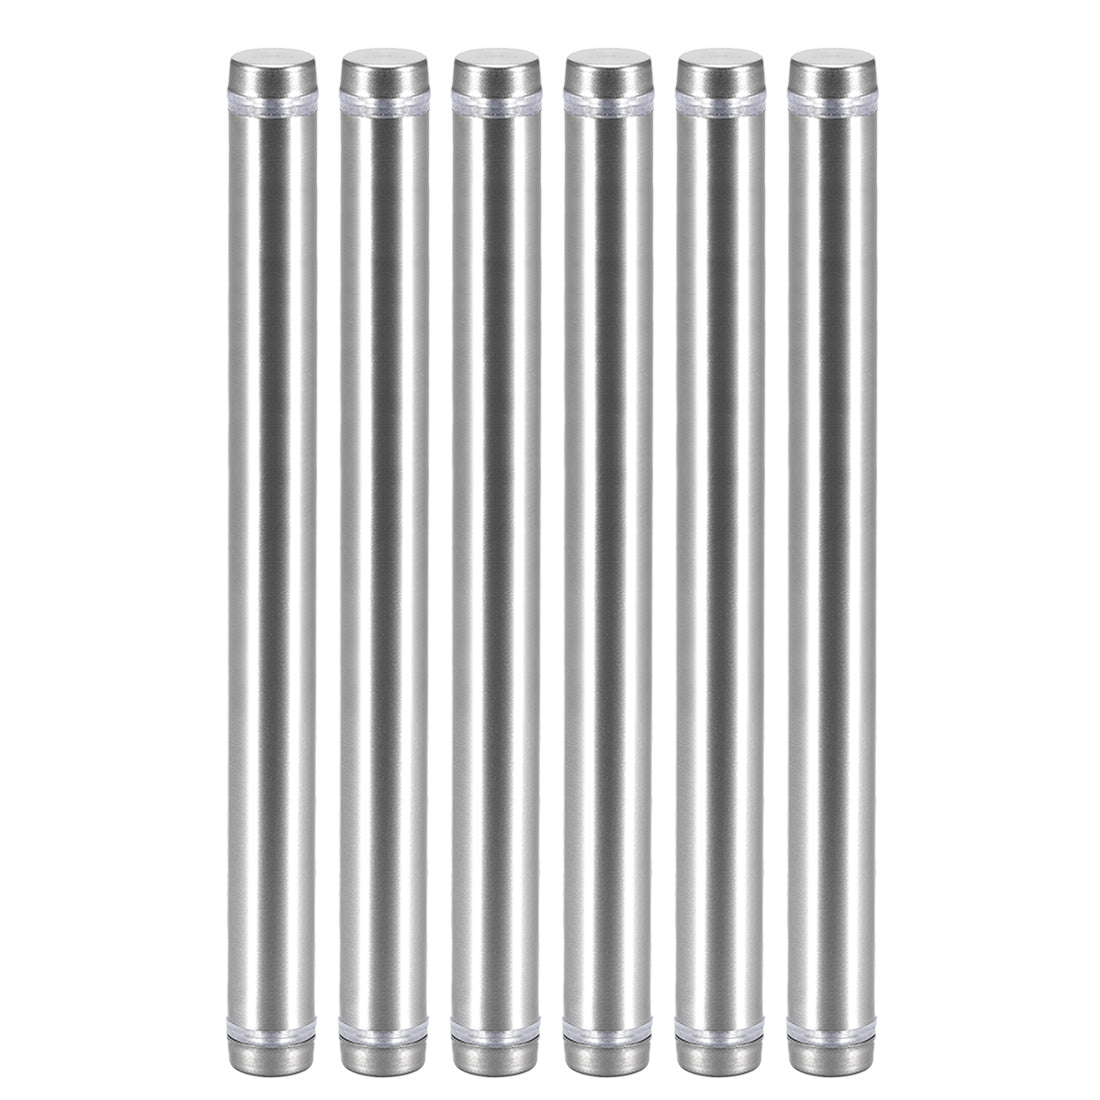 uxcell Uxcell Glass Standoff Double Head Stainless Steel Standoff Holder 12mm x 144mm 6 Pcs